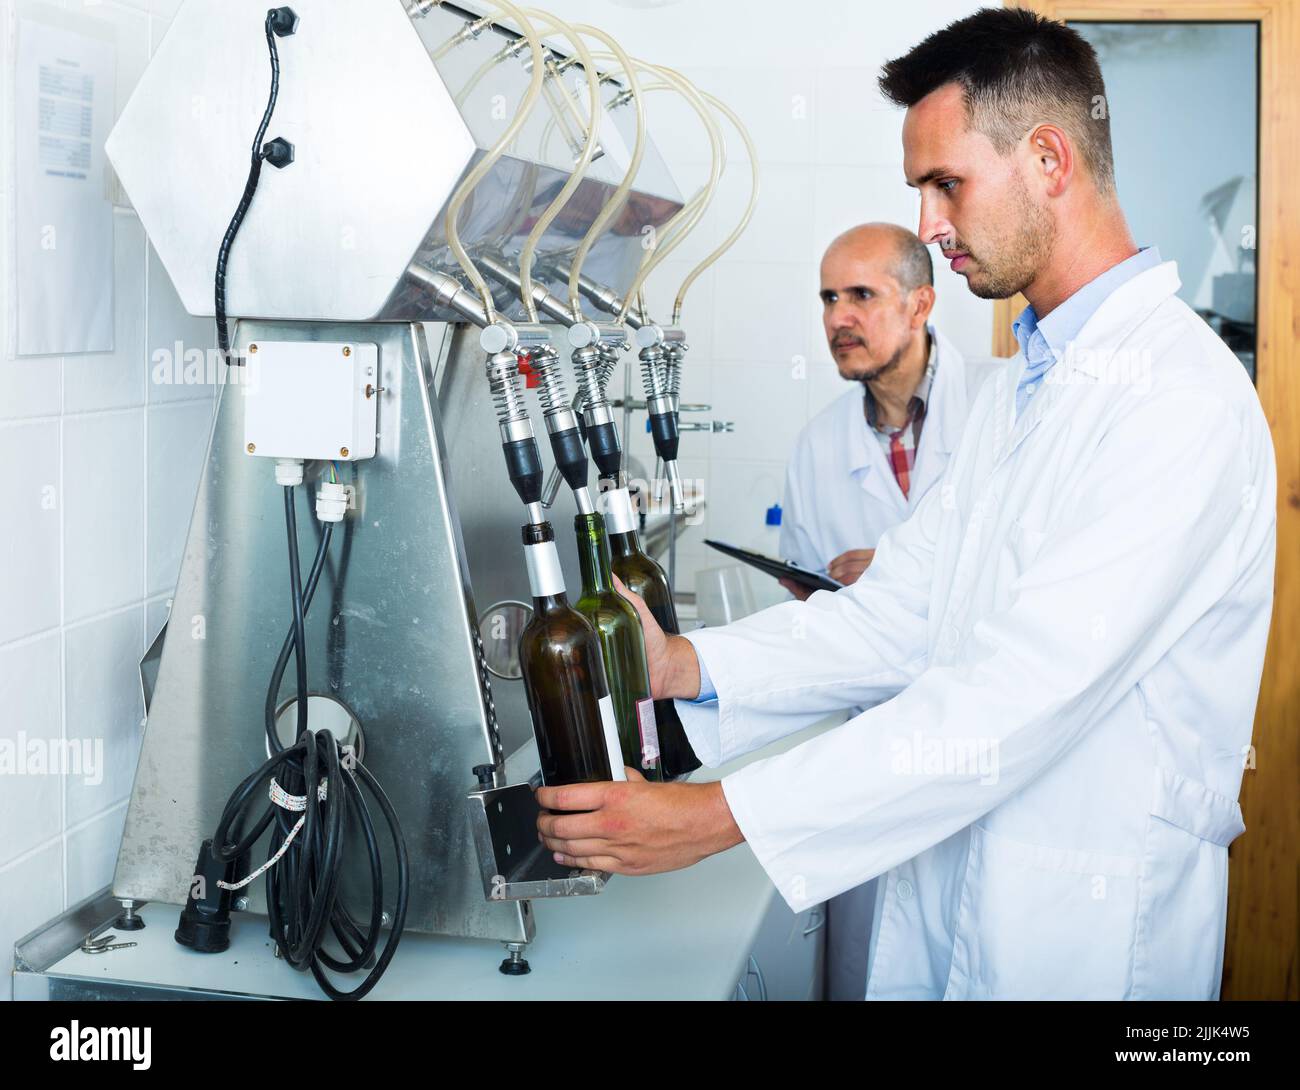 worker with bottling machinery Stock Photo